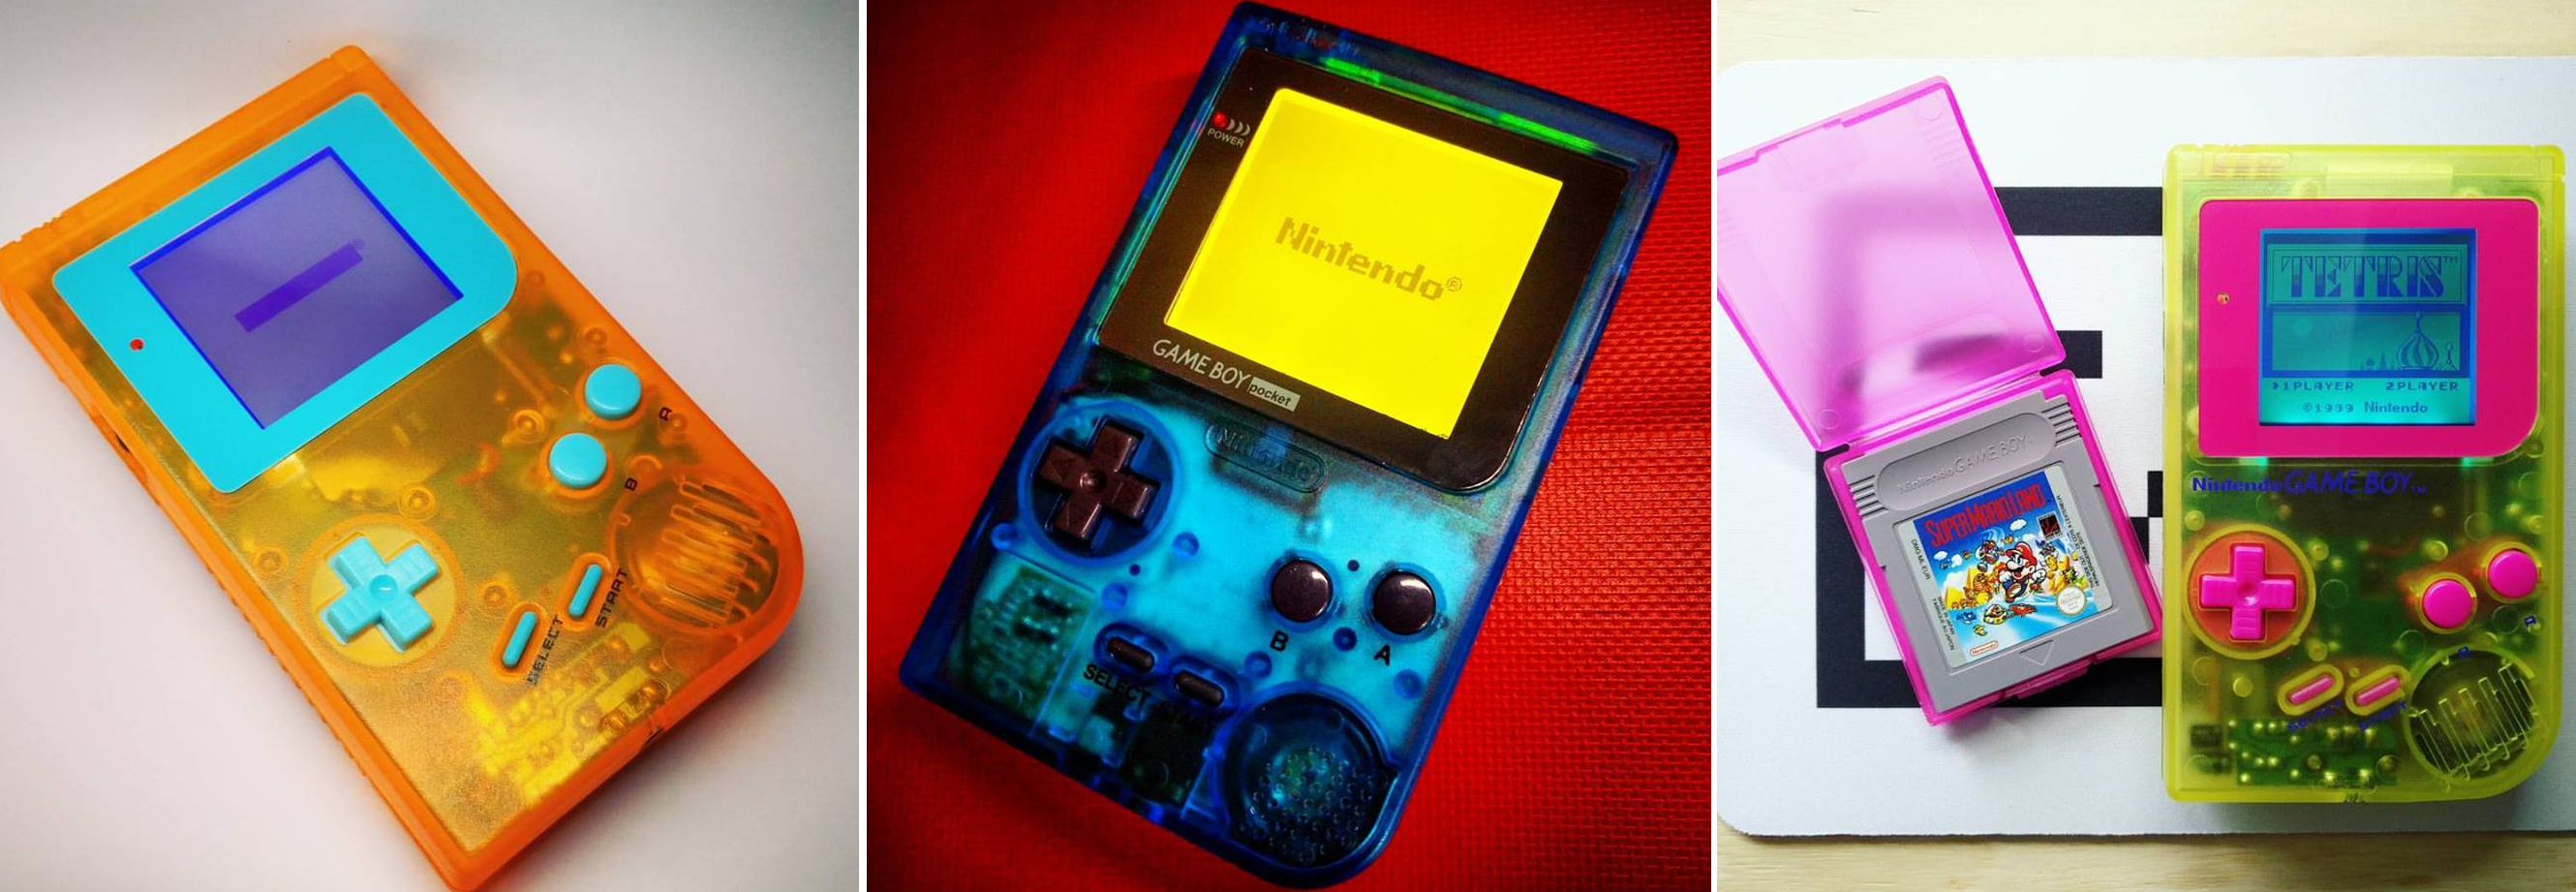 Thousands Of Modders Are Re-Inventing The Game Boy